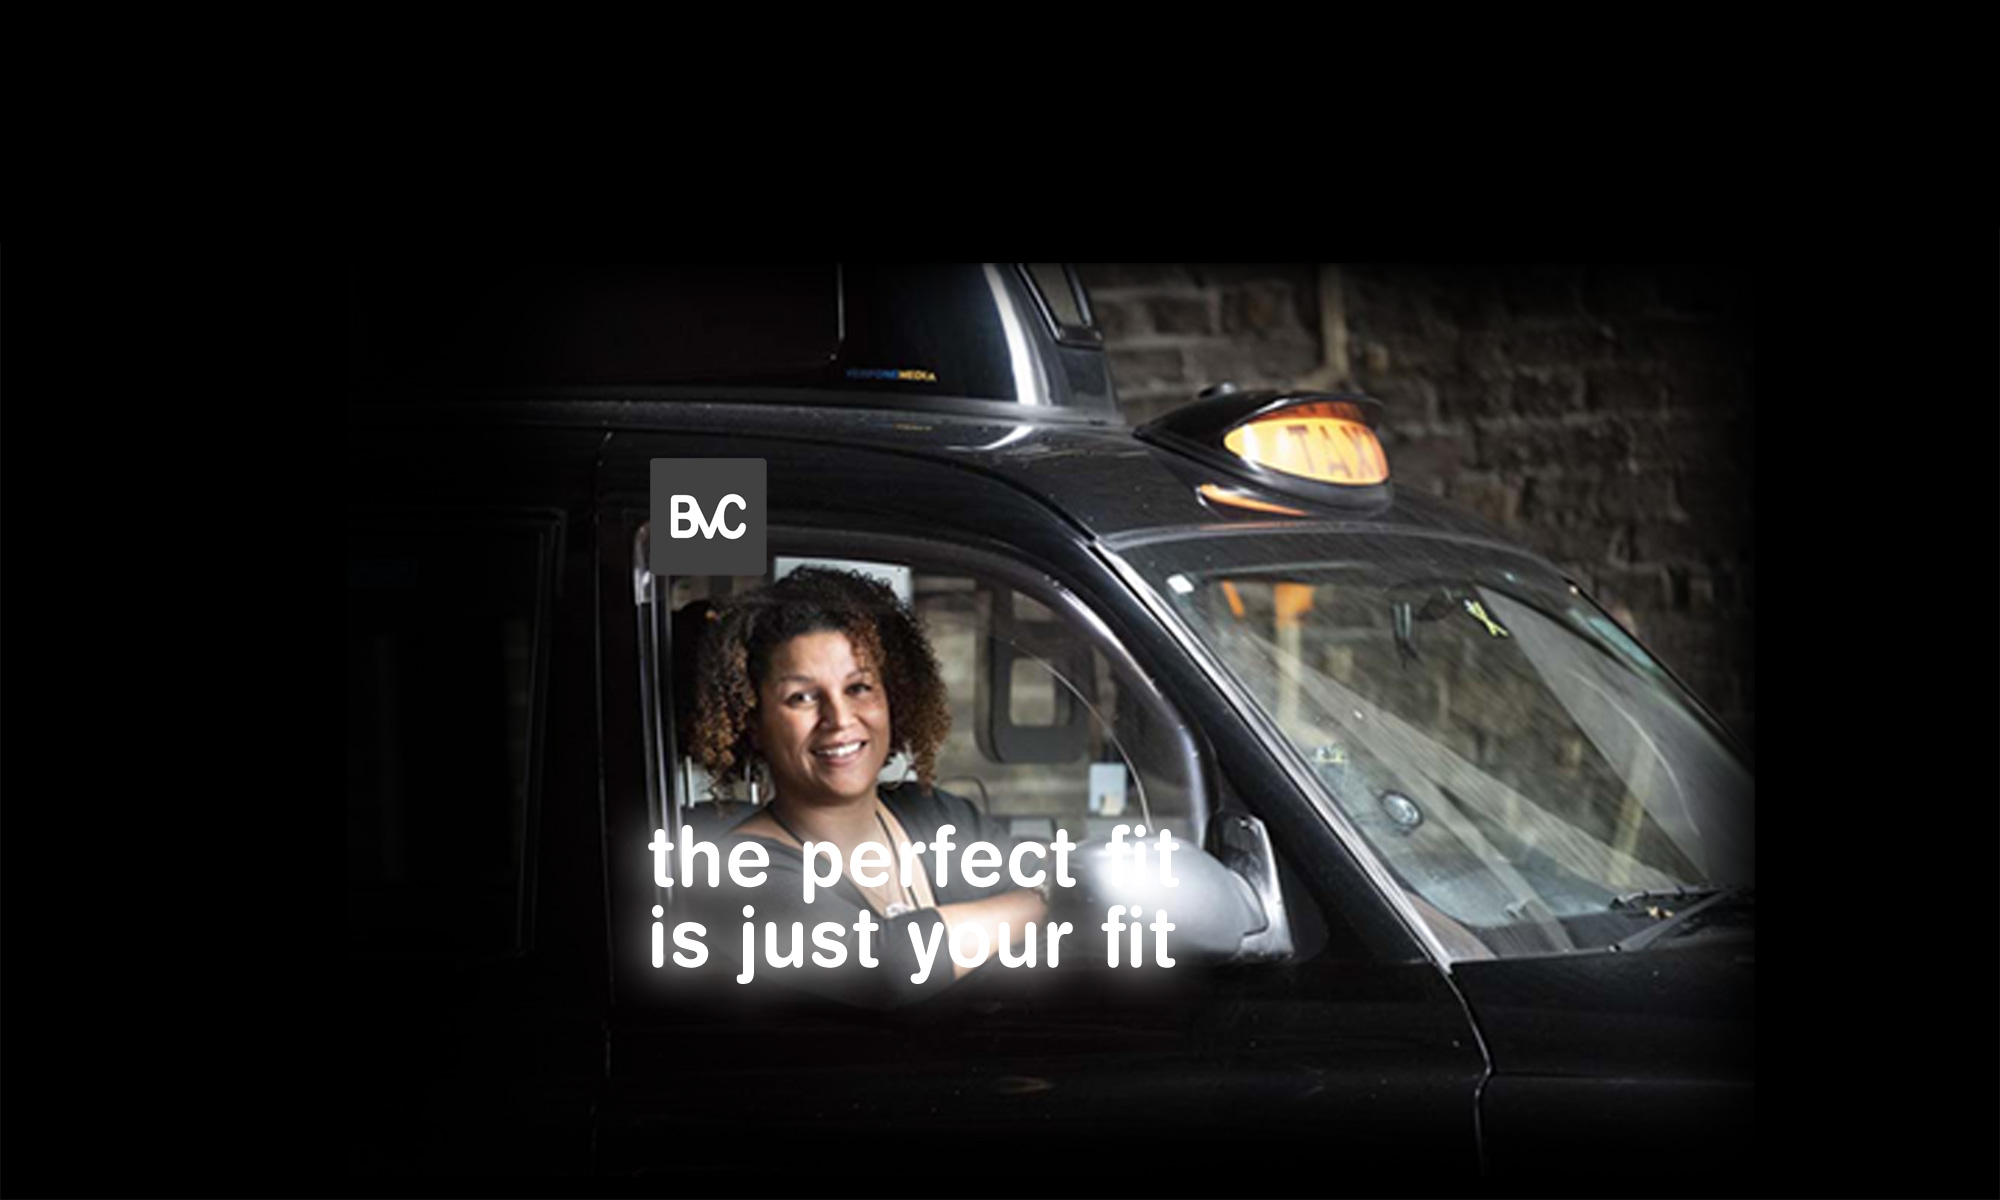 the perfect fit is your fit, BVC Marketing communications, black cab